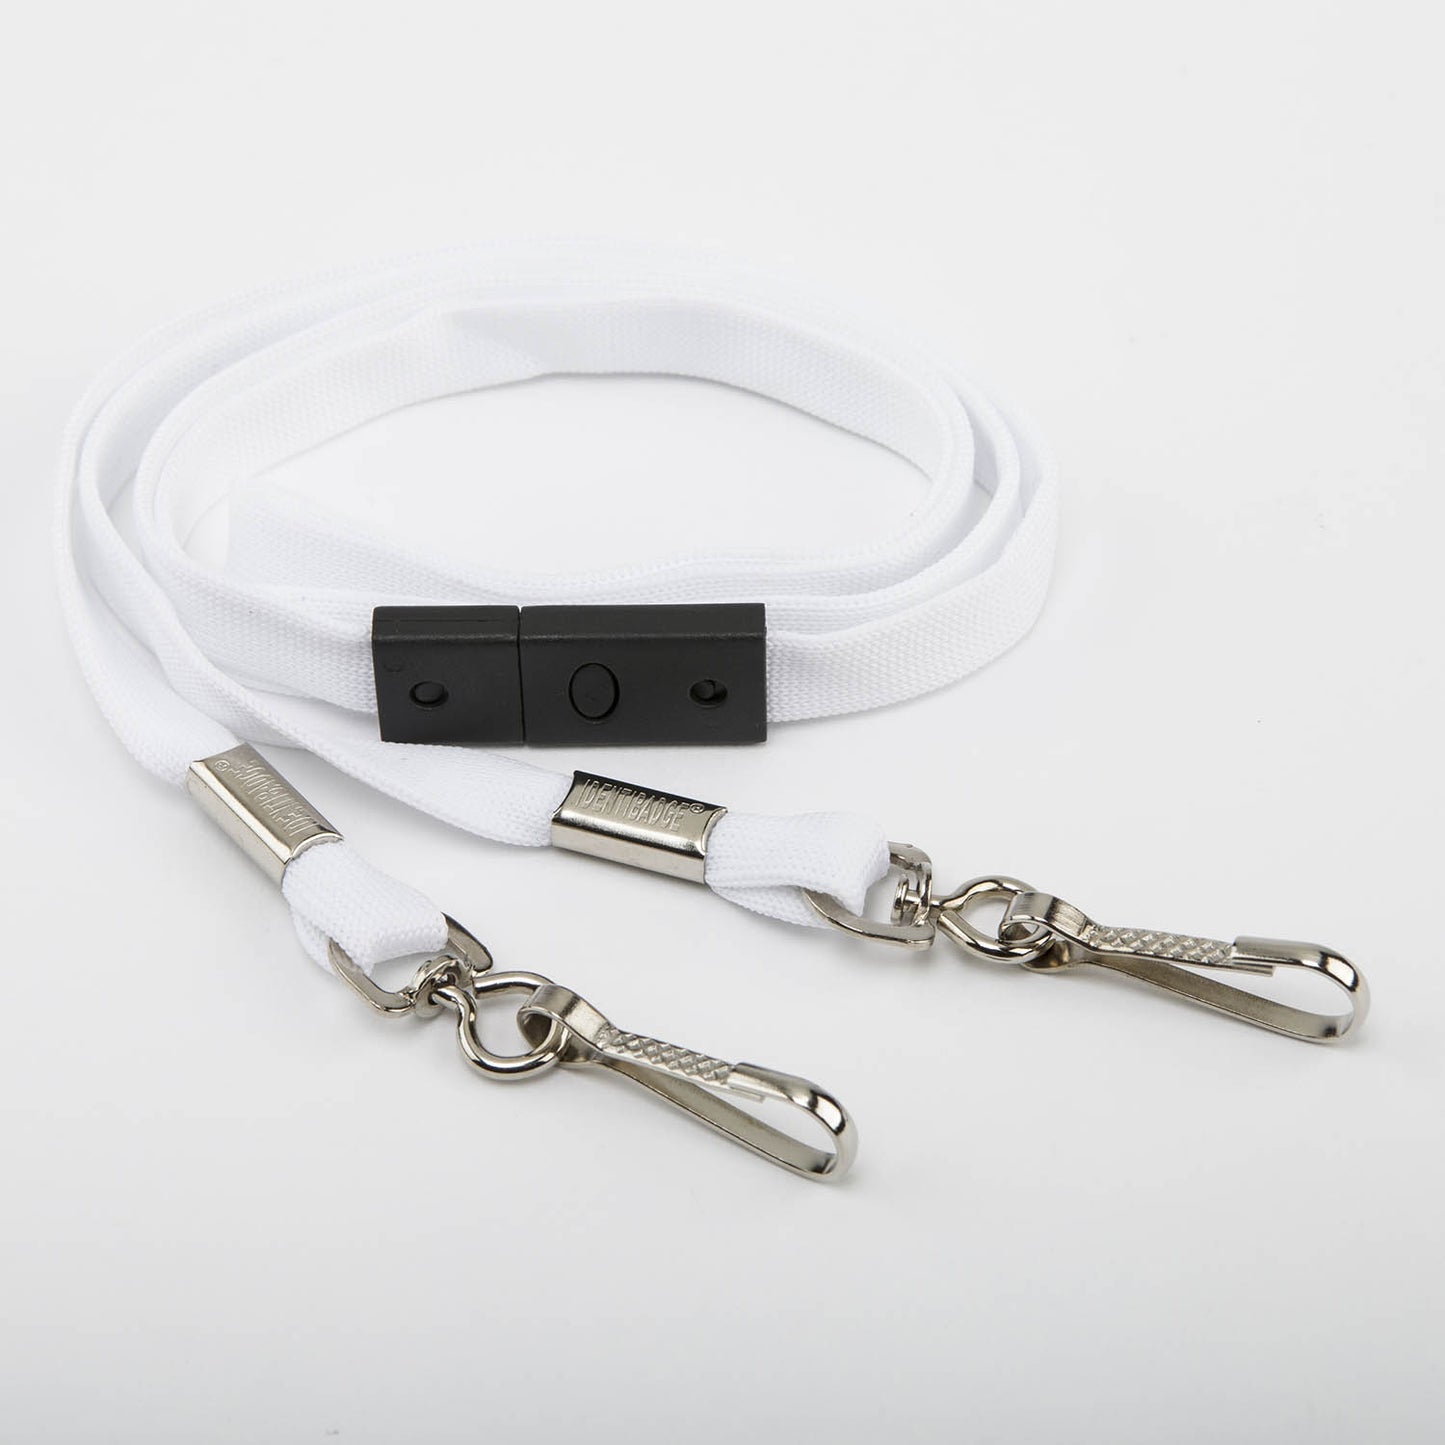 Double Ended Lanyards - Pack of 50